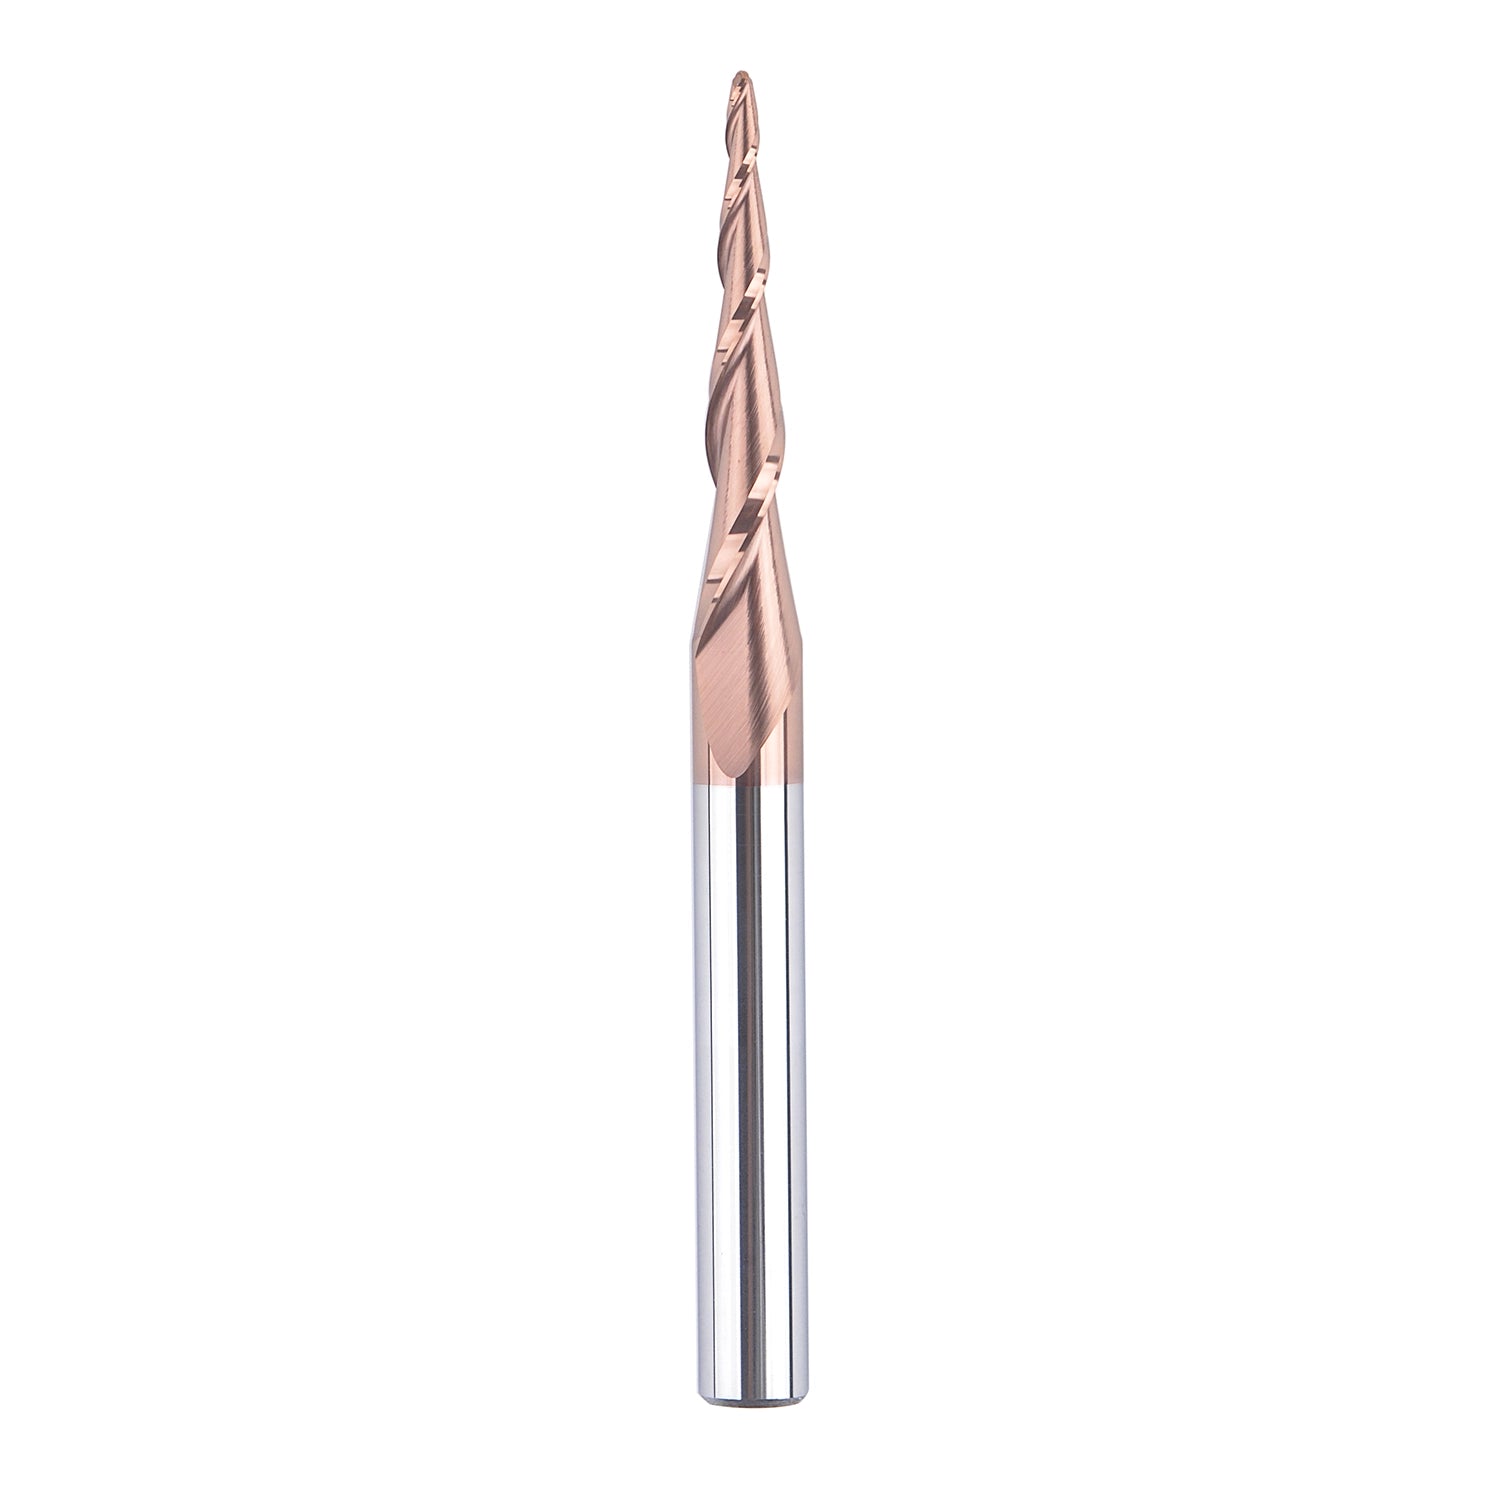 SpeTool 0.75mm Radius Tapered Ball Nose Carving Endmill H-Si Coated